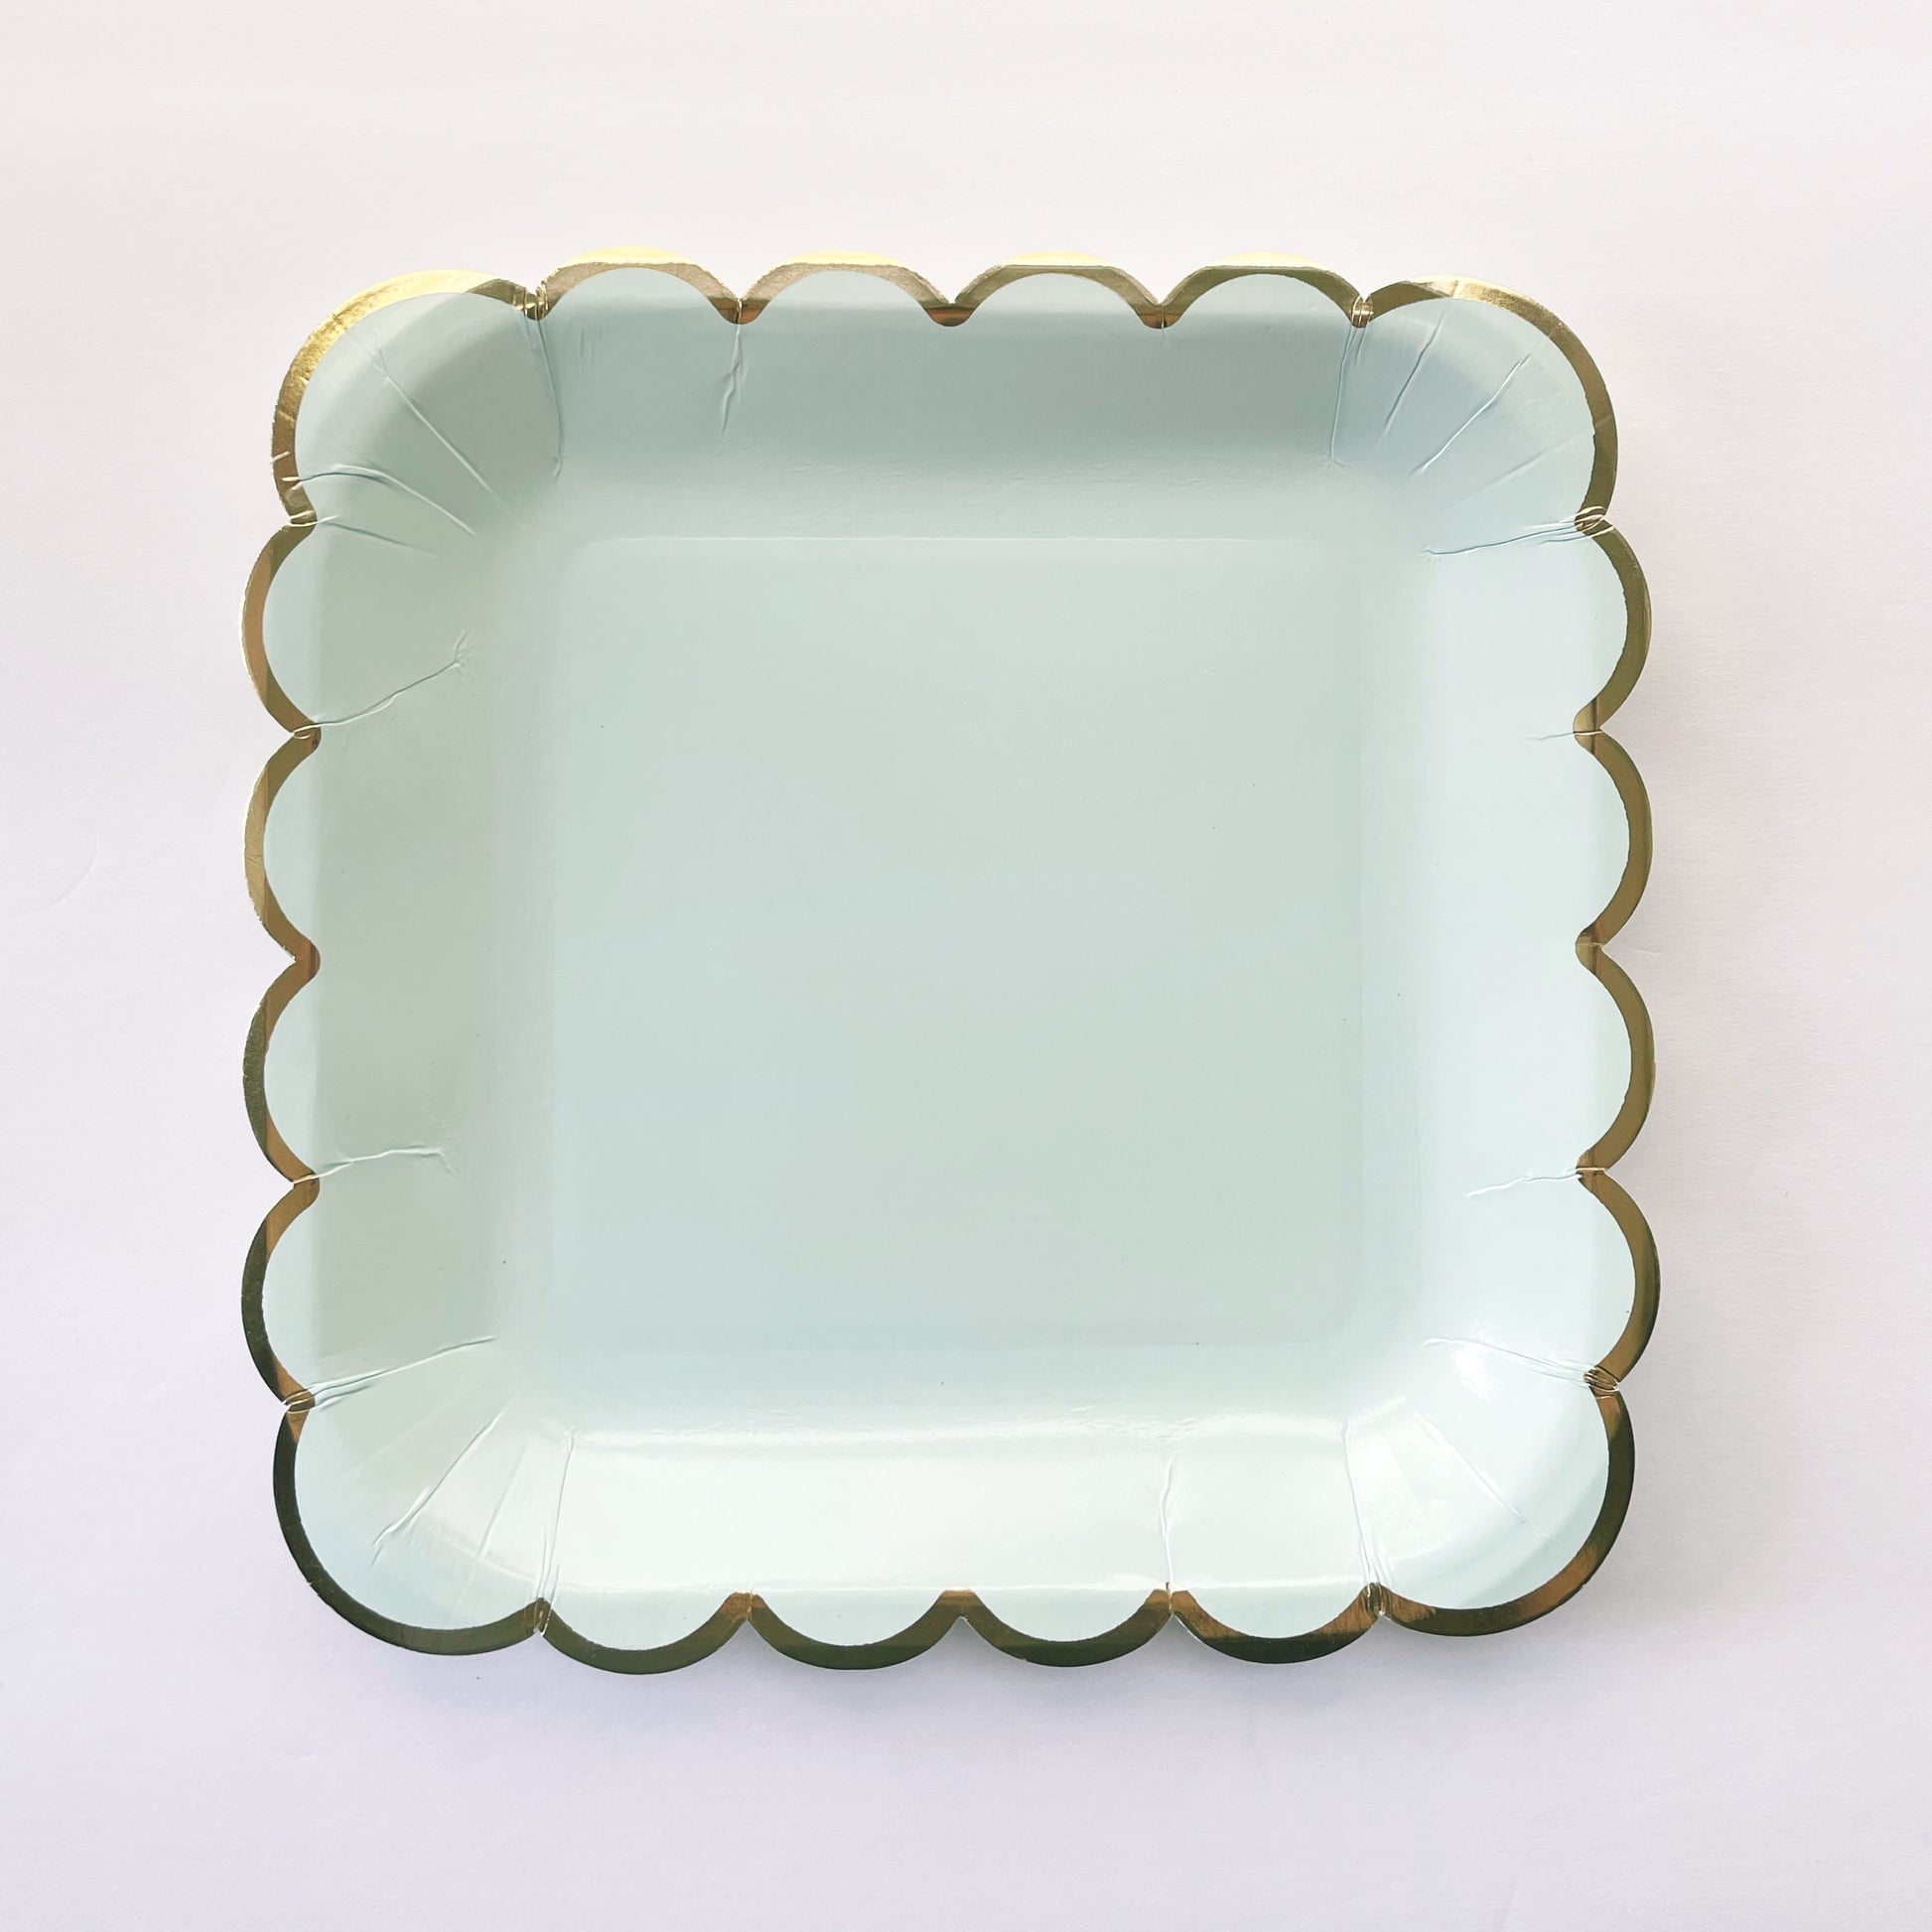 The large paper party plates are in the shape of a square. The plates are a pale pastel blue colour with gold foil scalloped trim.